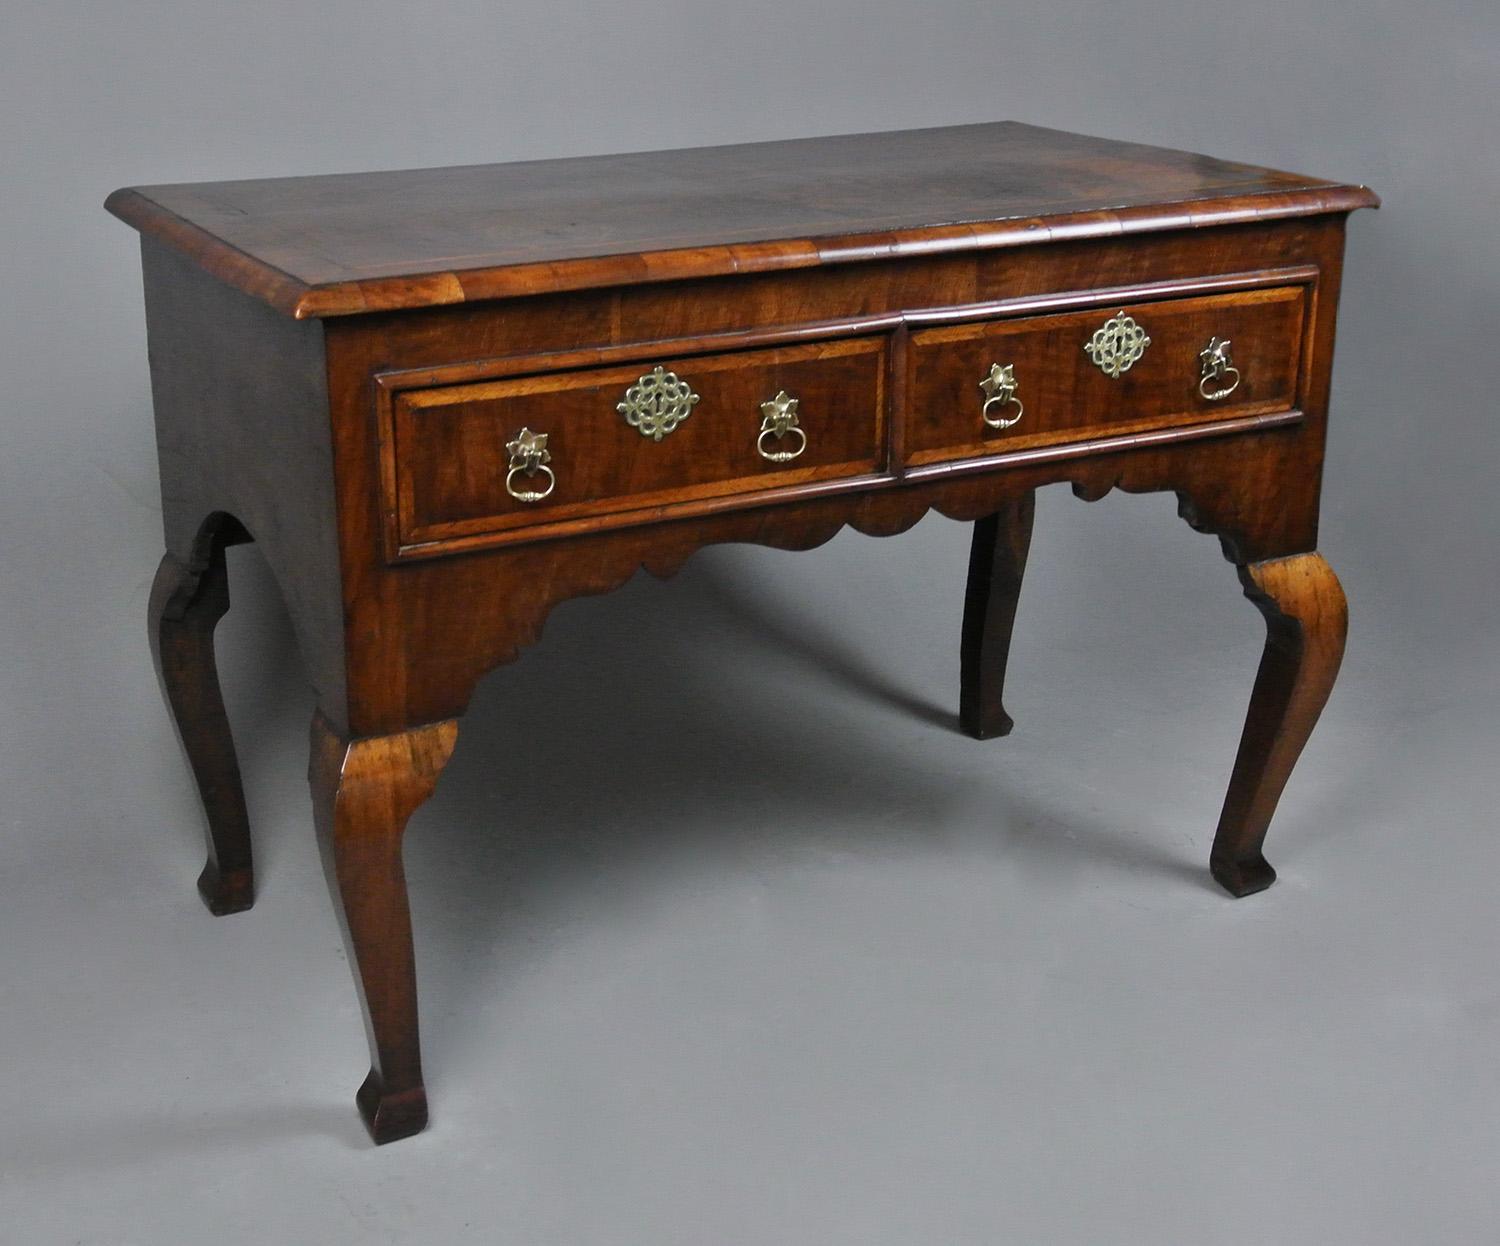 George I Walnut and Laburnum Oyster Veneer Dressing Table c. 1730 In Good Condition For Sale In Heathfield, GB